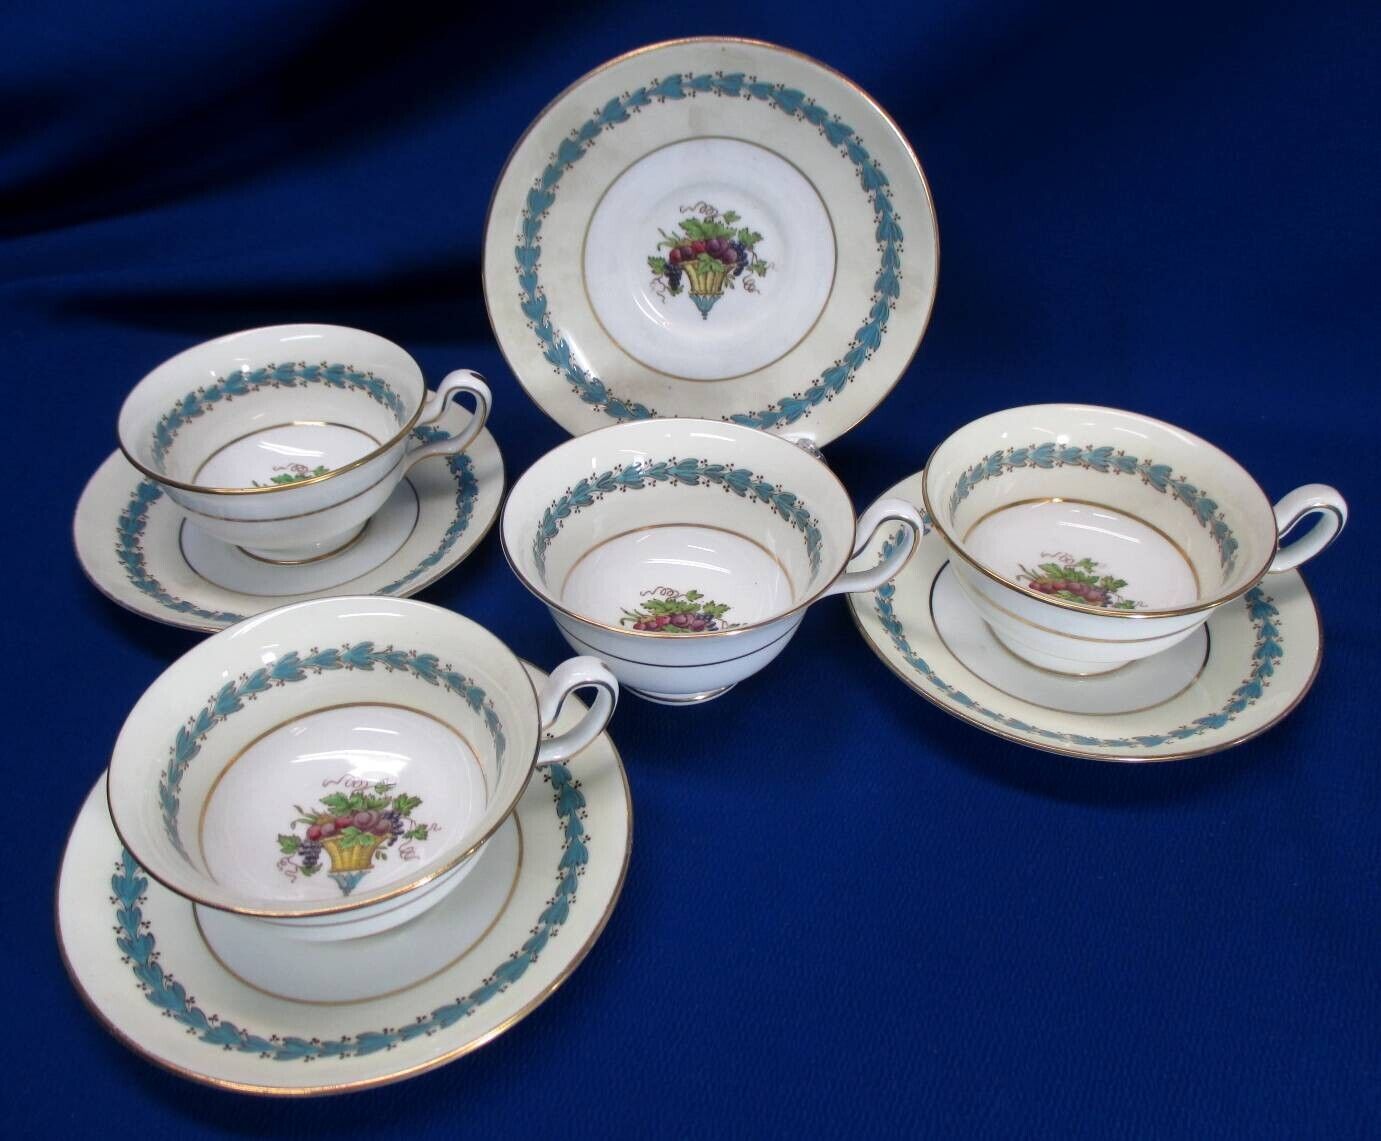 SET OF 4 WEDGWOOD APPLEDORE PATTERN CUP & SAUCER SETS